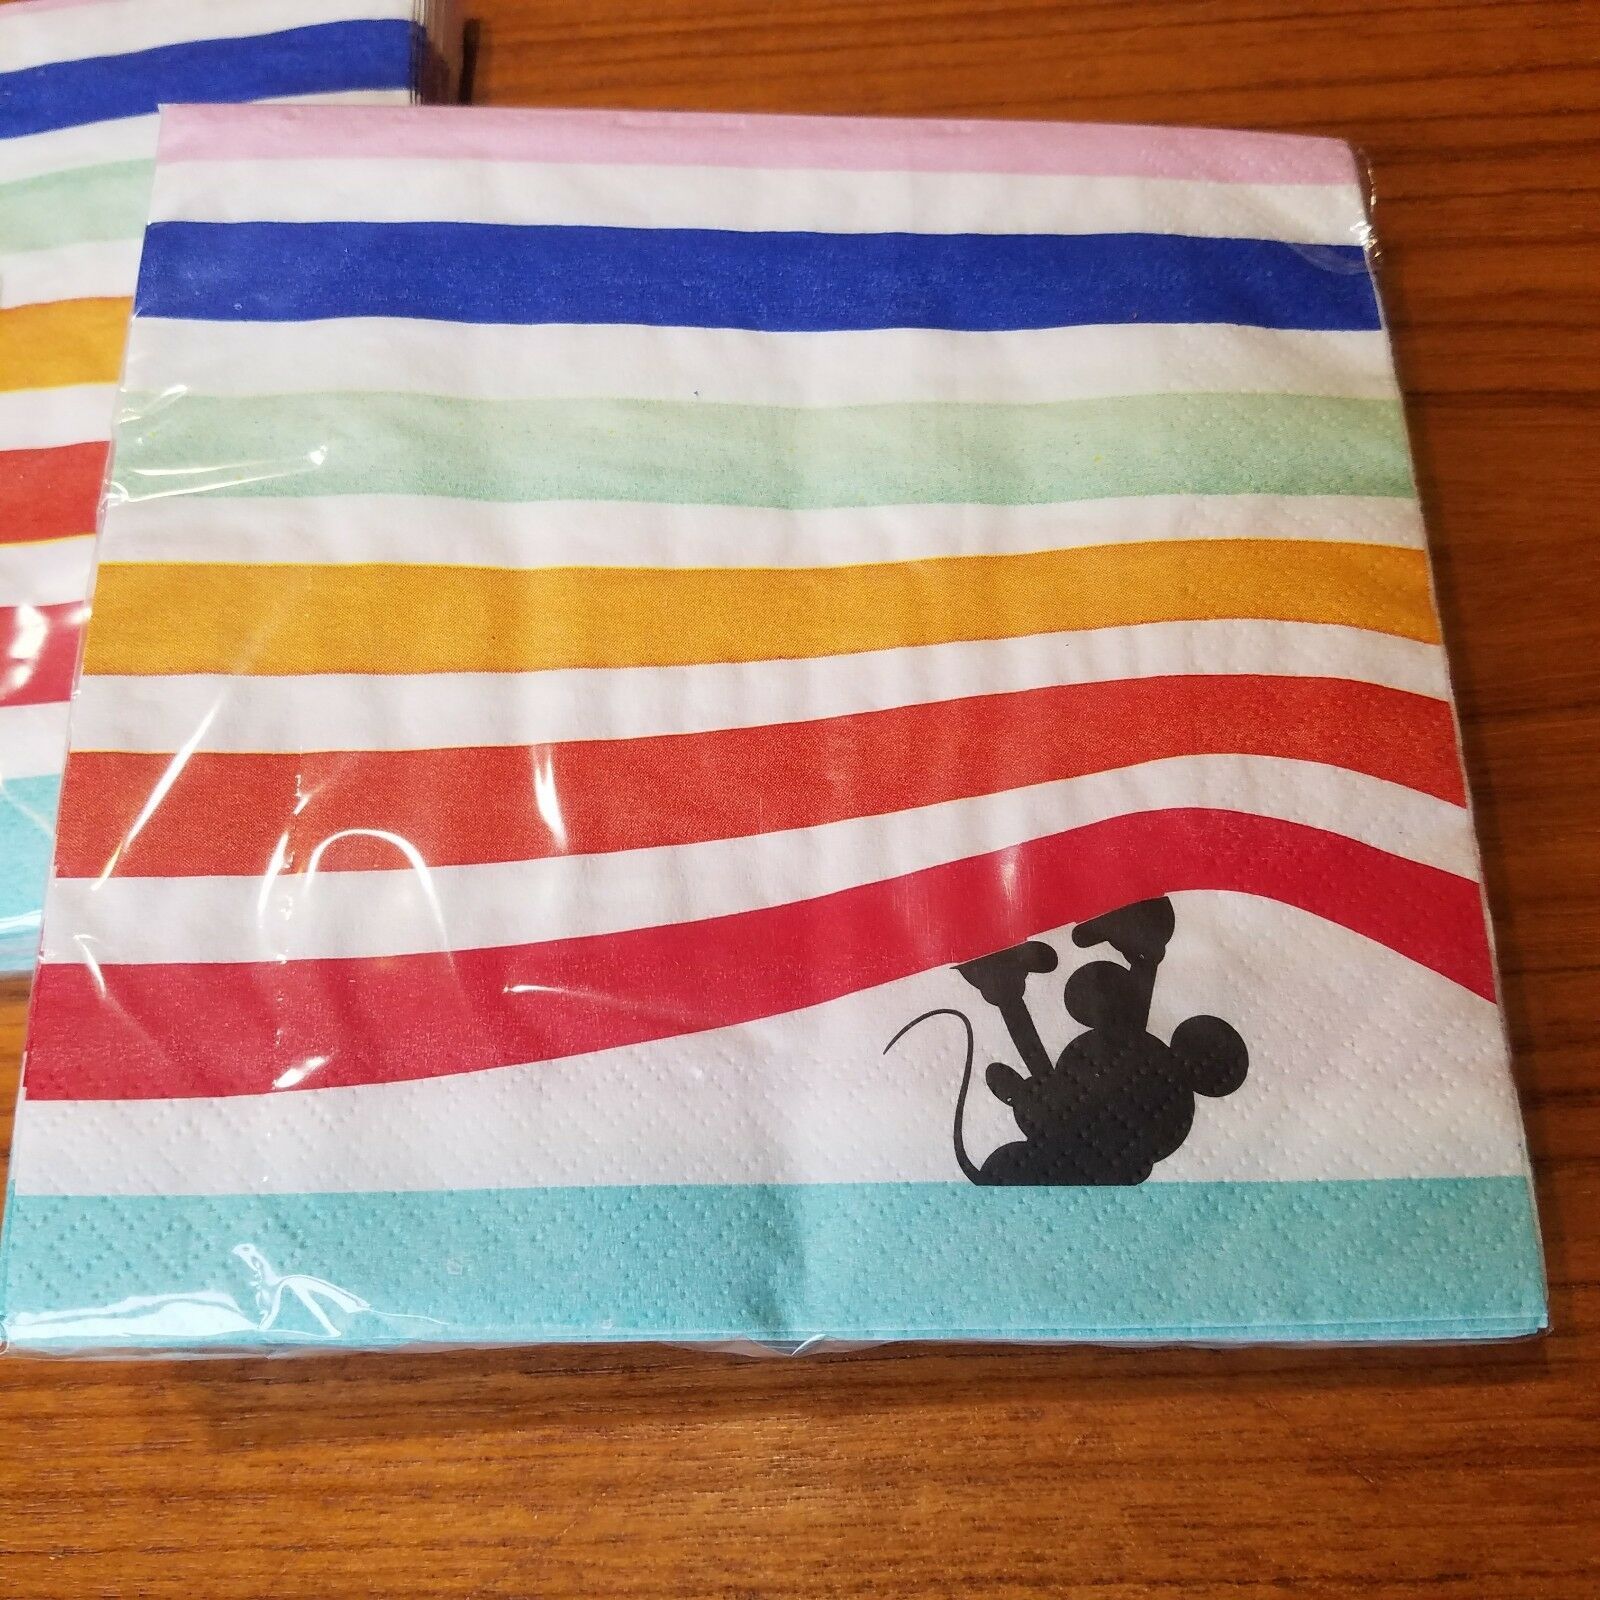 Details about   Coordinate Dishes Glasses Napkins Tablecloth Party Topolino Baby Mickey Mouse 